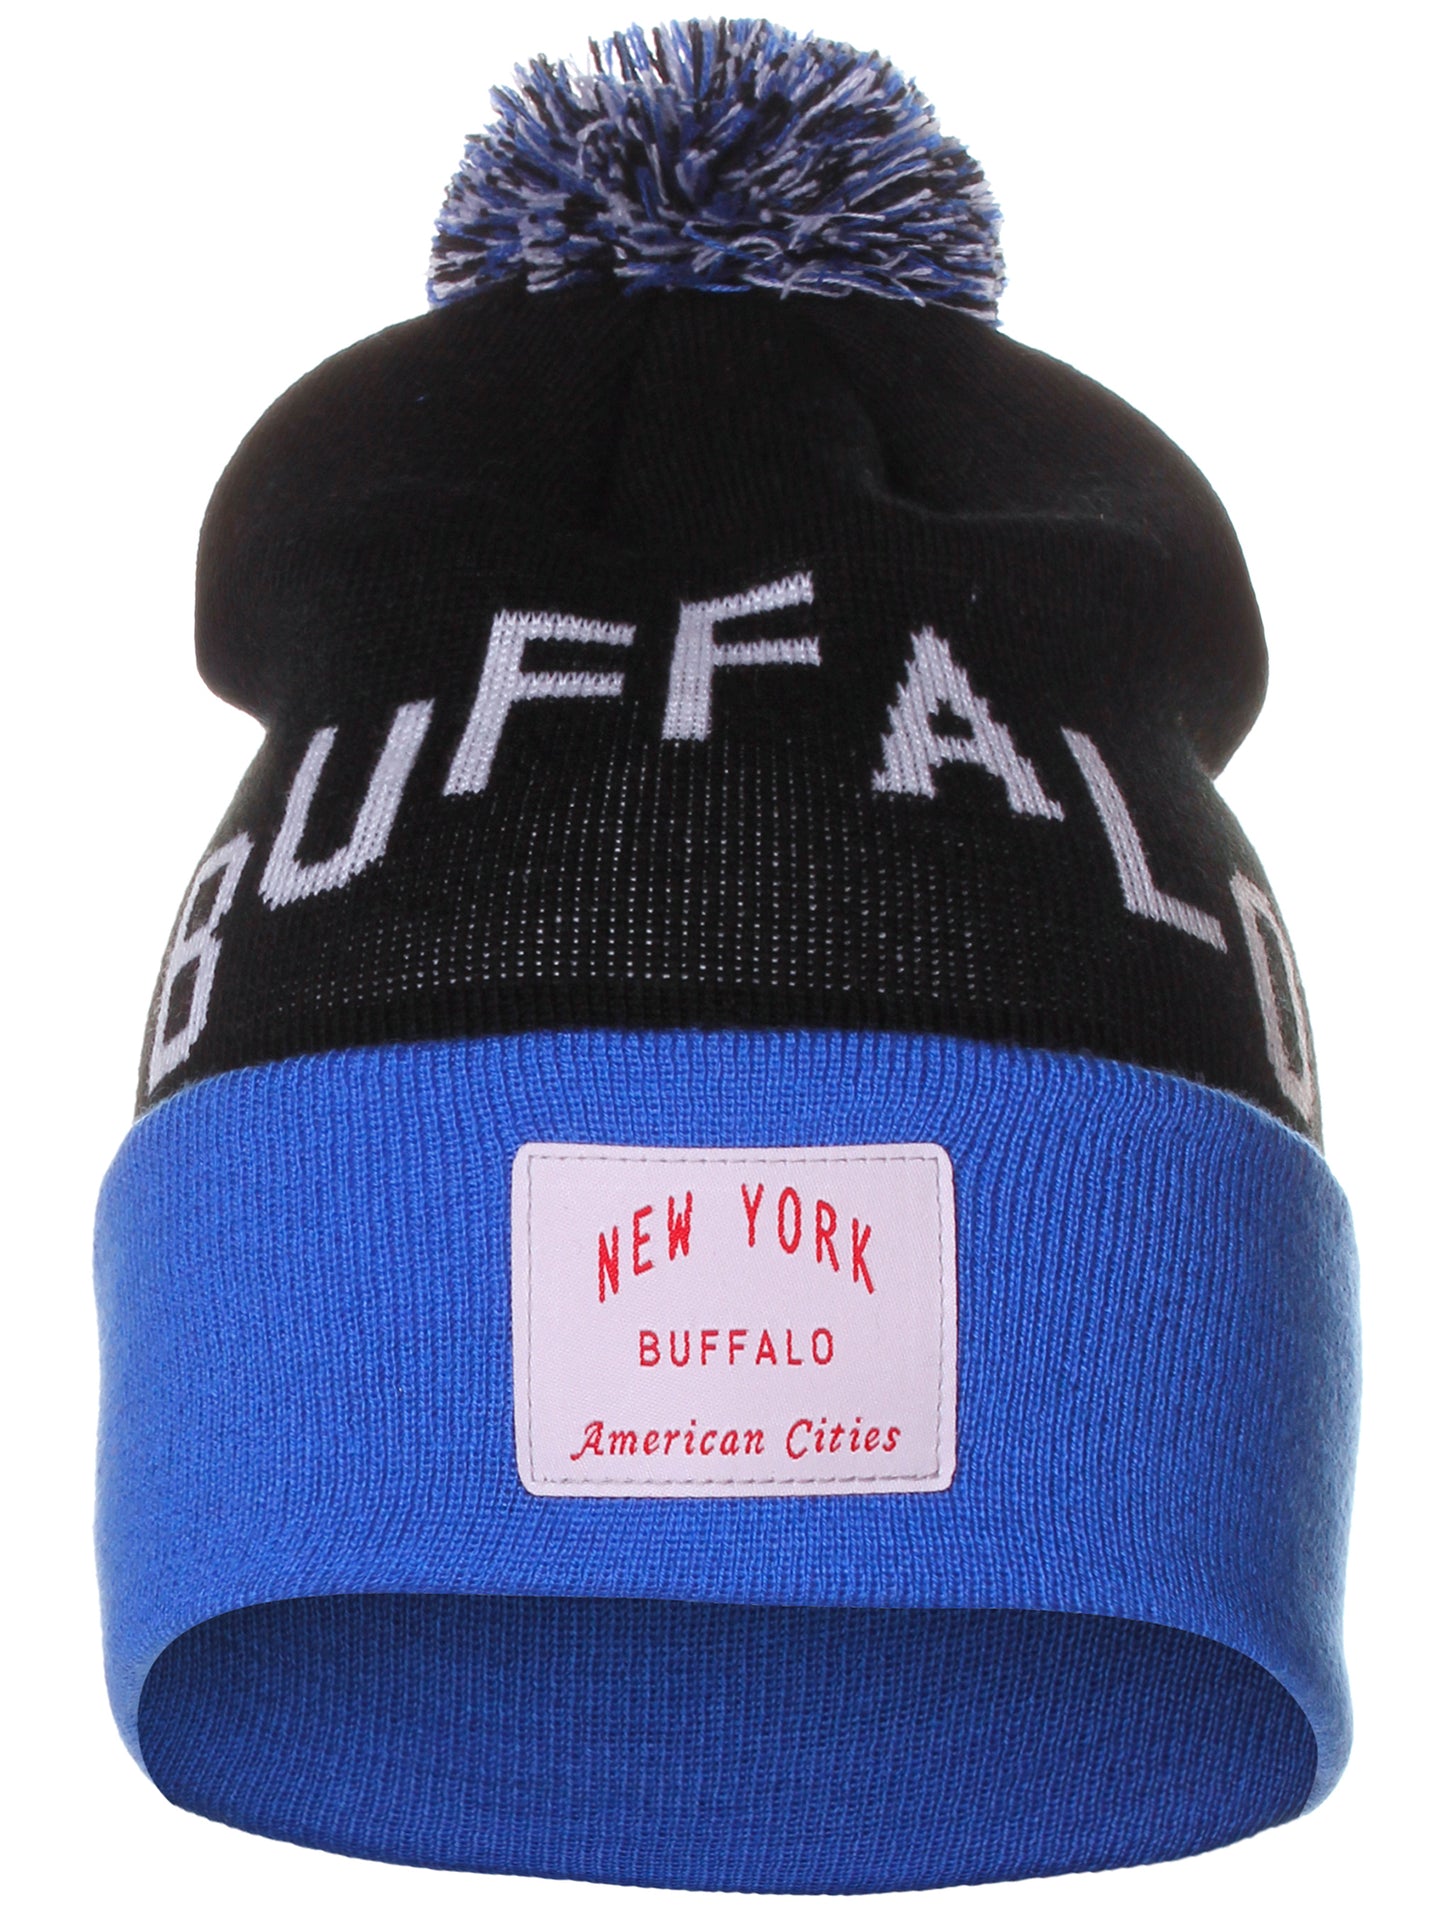 American Cities Buffalo New York Arch Letters Pom Pom Knit Hat Cap Beanie